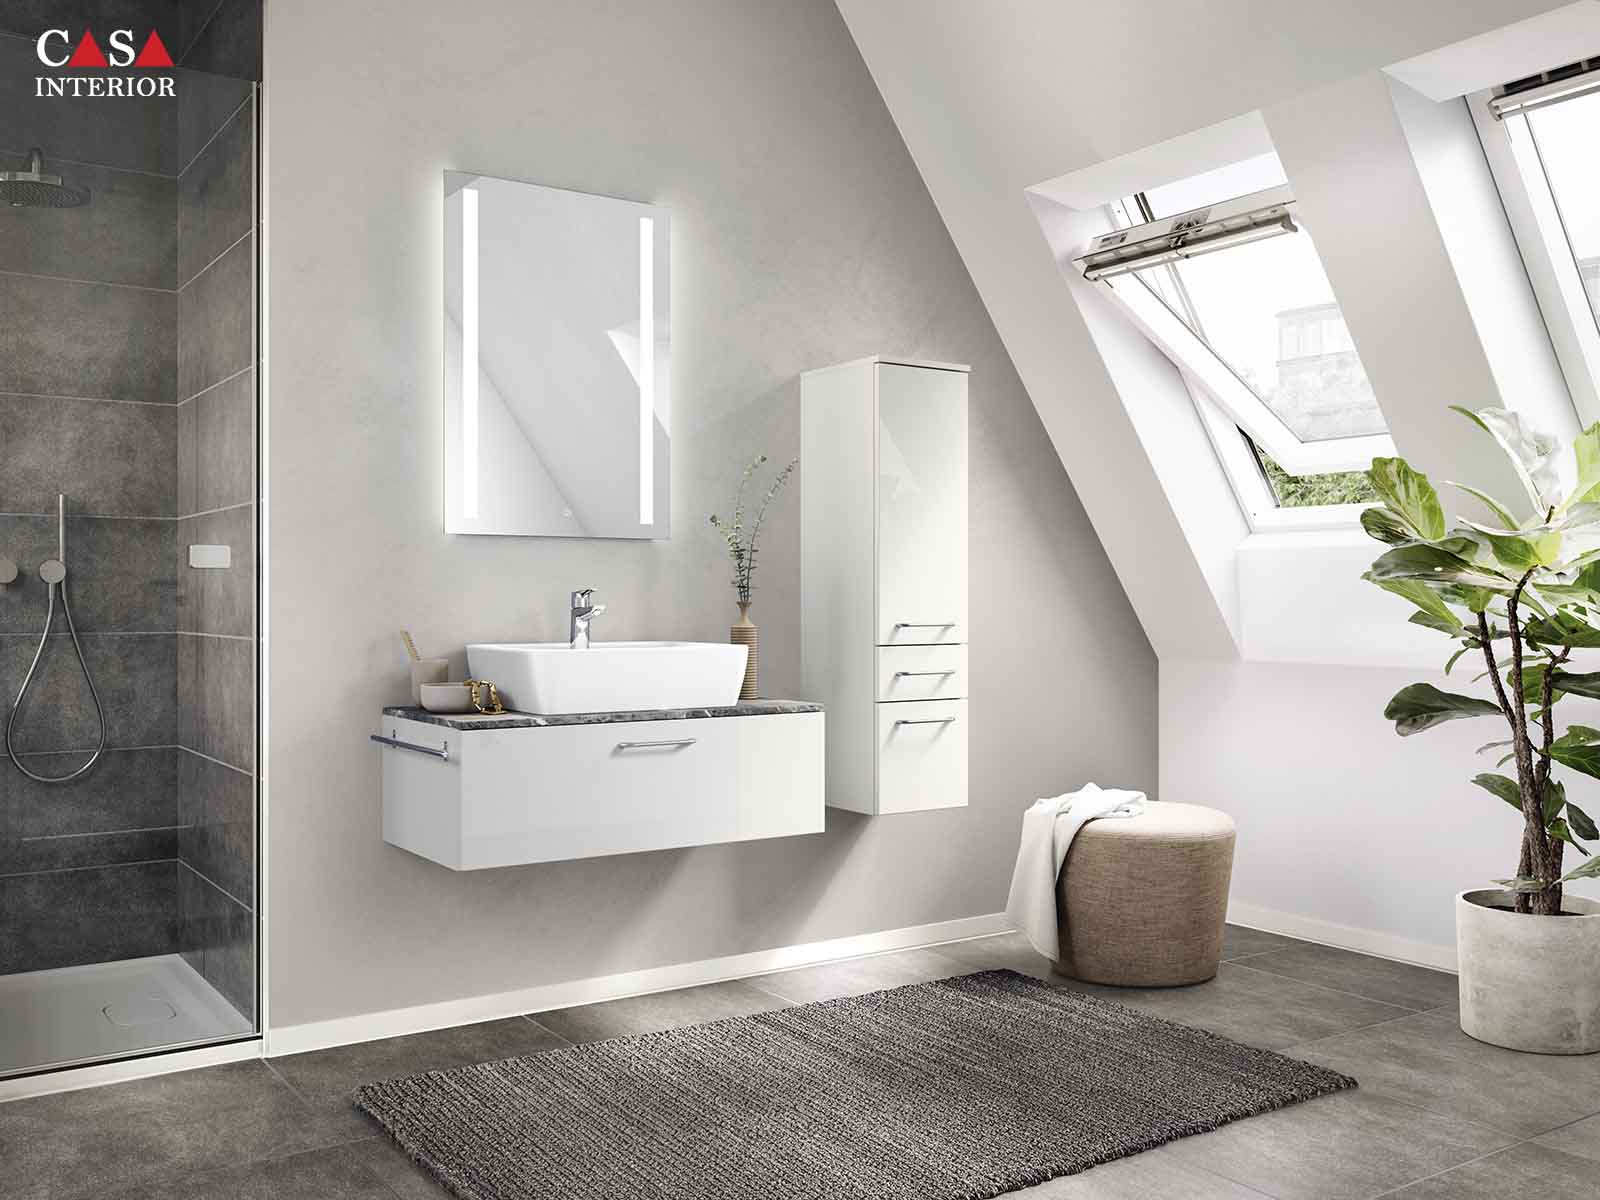 Küchentime Lux Lacquer, satin grey high gloss 819 - Bathroom